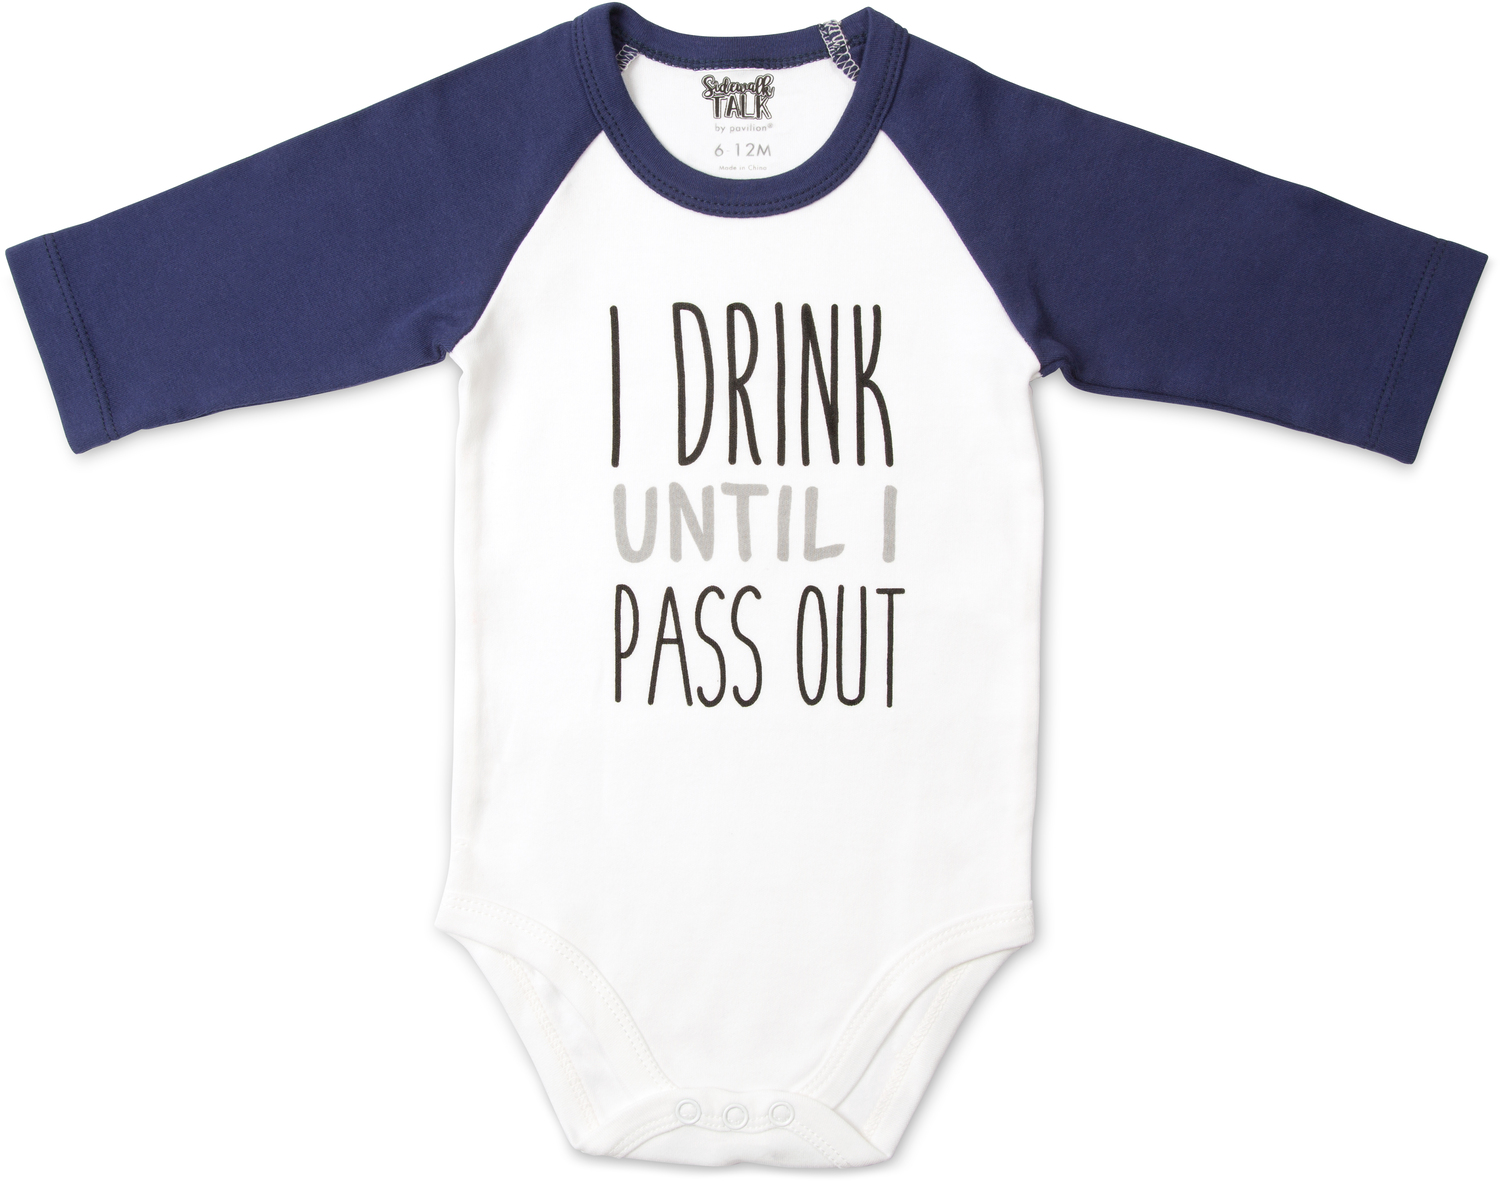 Pass out by Sidewalk Talk - Pass out - 12-24 Months 3/4 Length Navy Sleeve Onesie